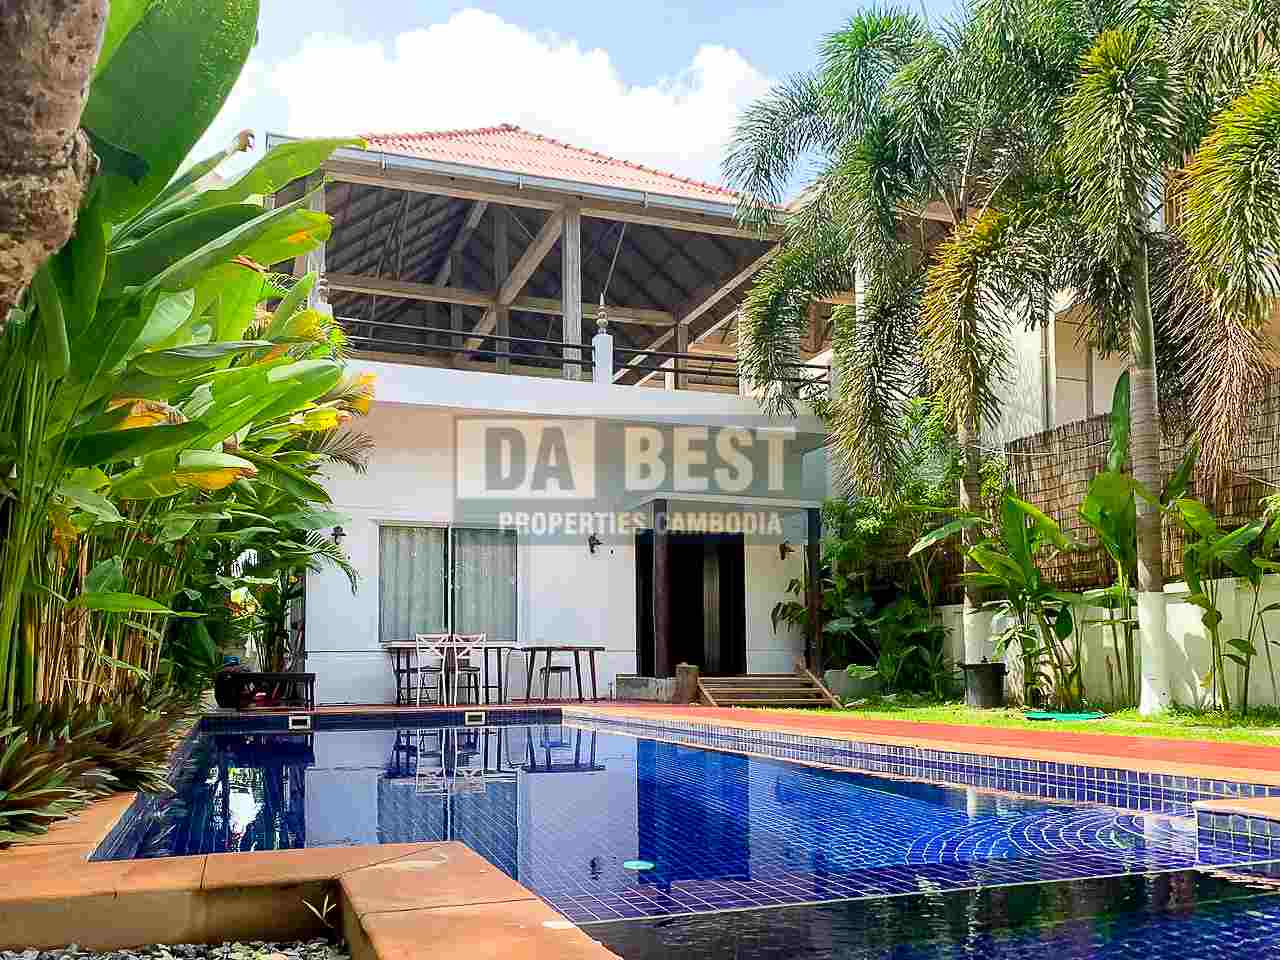 Private Villa 3 Bedroom With Swimming Pool For sale in Siem Reap - Svay Dangkum